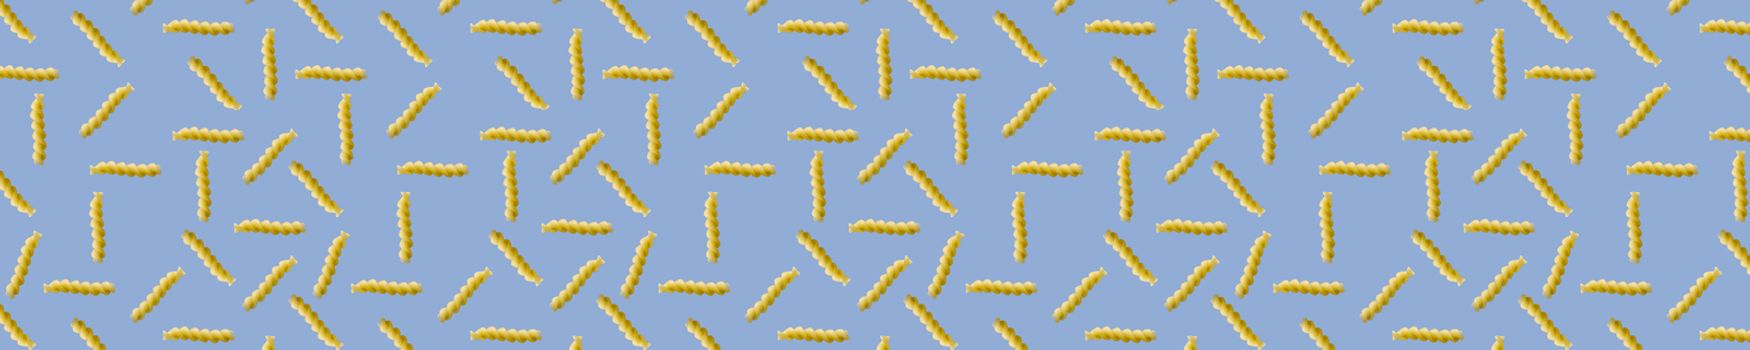 Fusilli pasta random flat lay on blue background without shadow. can be used as raw pasta background, poster, banner not pattern